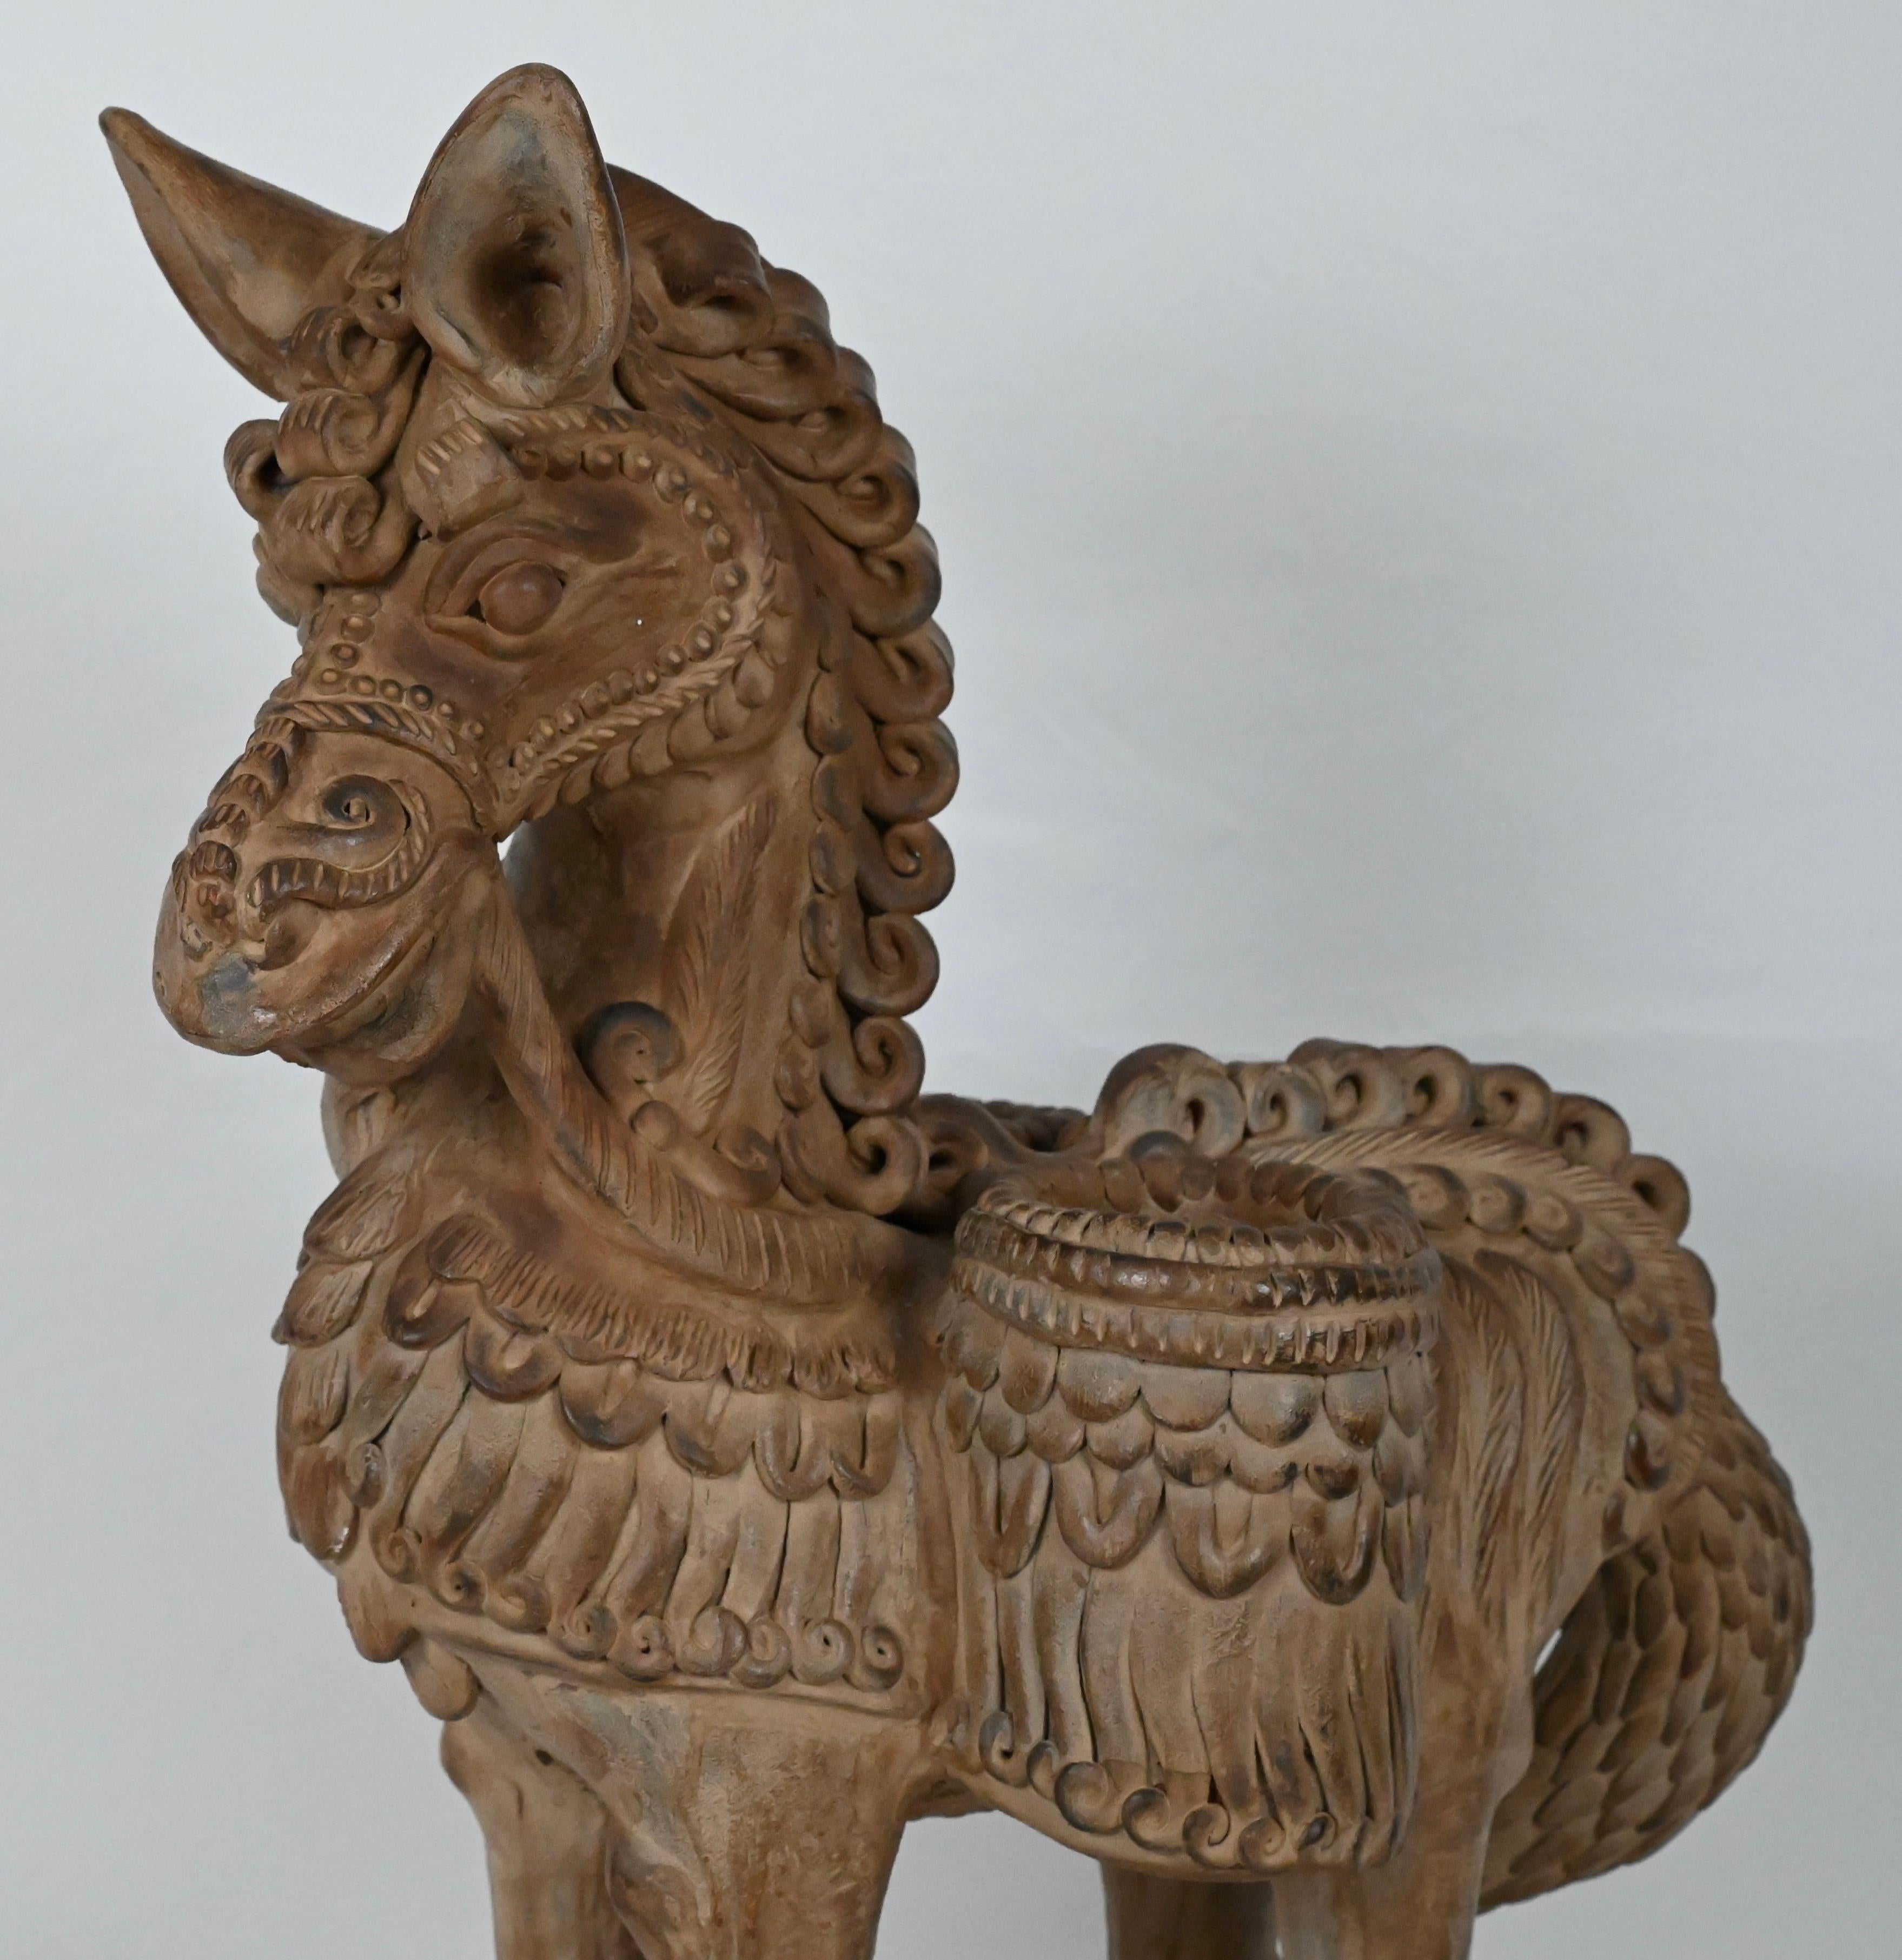 A finely detailed Hand-Carved Terracotta Horse Sculpture by Ugo Zaccagnini.

The wonderfully decorative Ugo Zaccagnini horse sculpture would enhance any setting, Mid-Century Modern, Contemporary, Traditional, Arts & Crafts, Art Deco, Modern, Beach